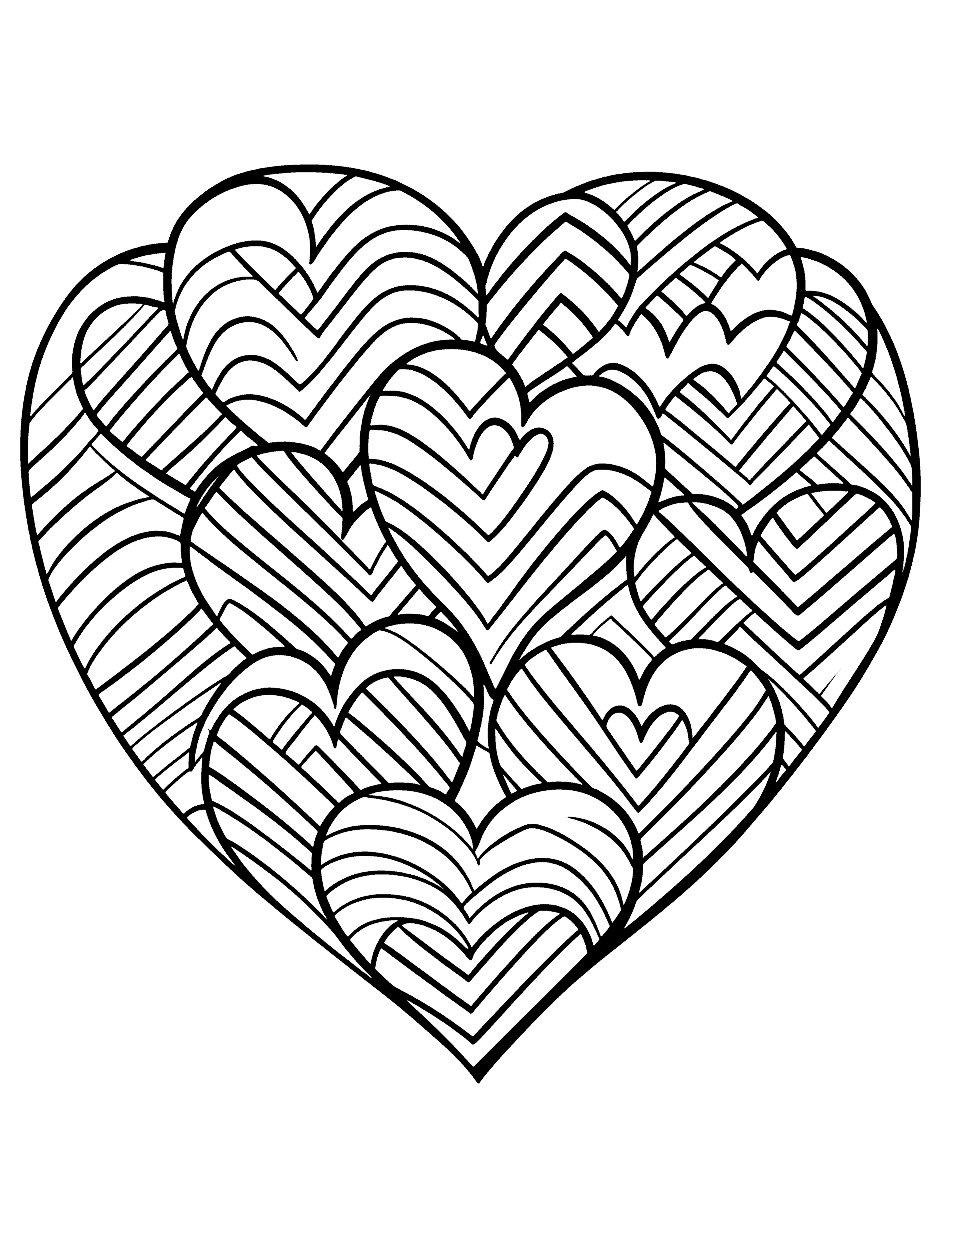 Simple Heart Design Coloring Page - A page with large, simple hearts that younger children can easily color.